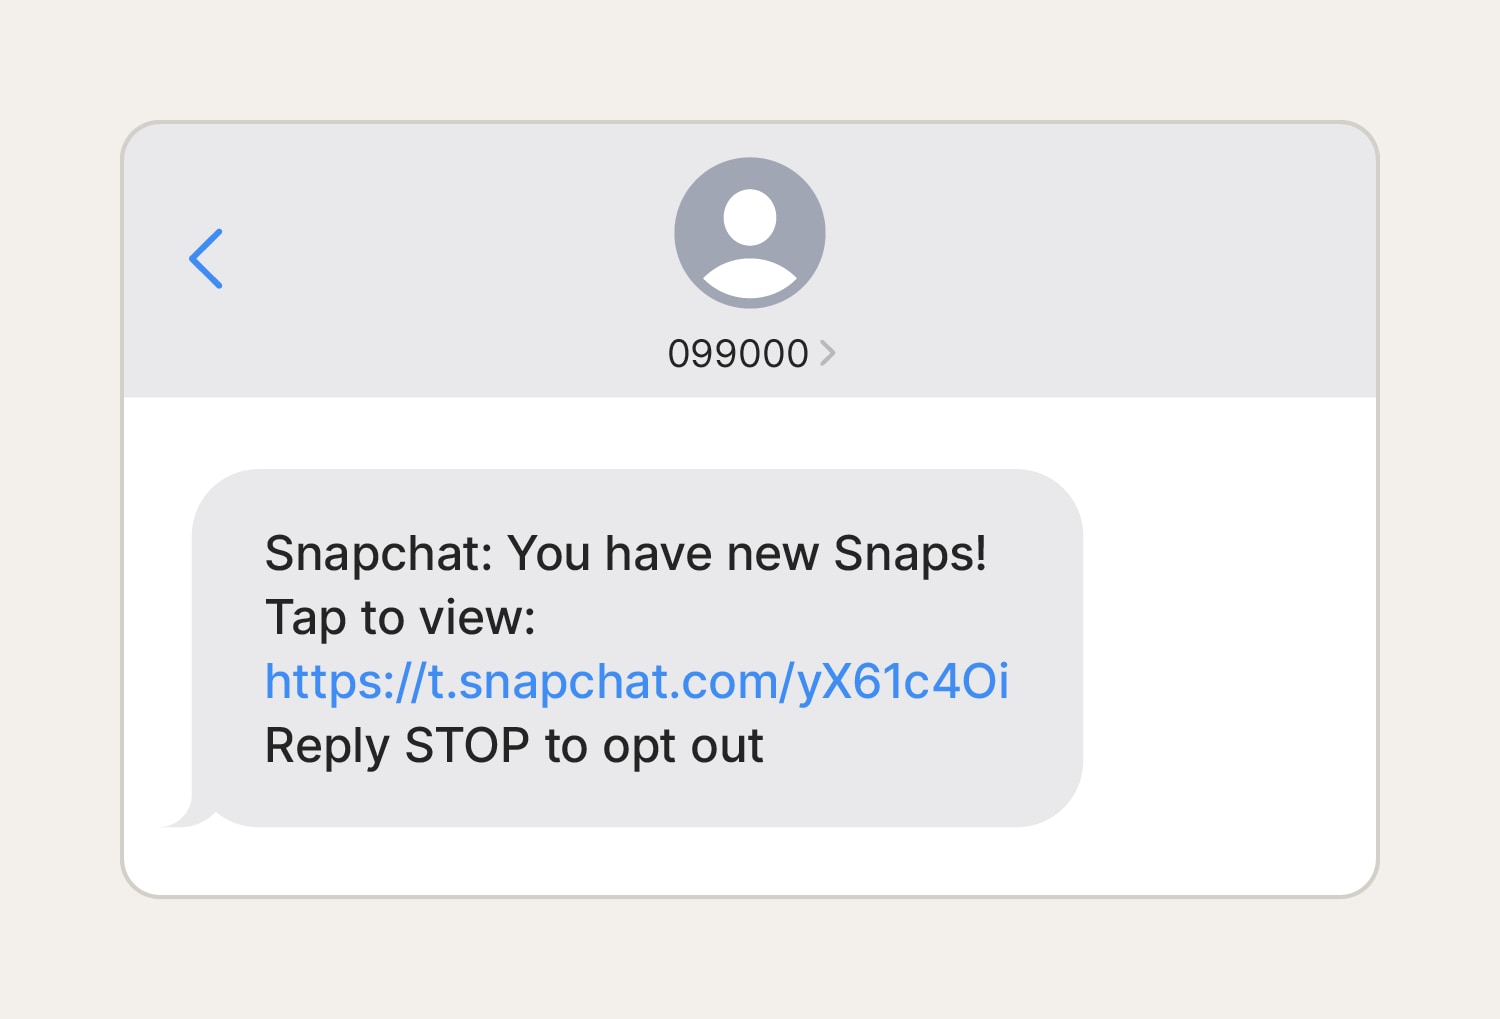 An example of a common Snapchat scam.